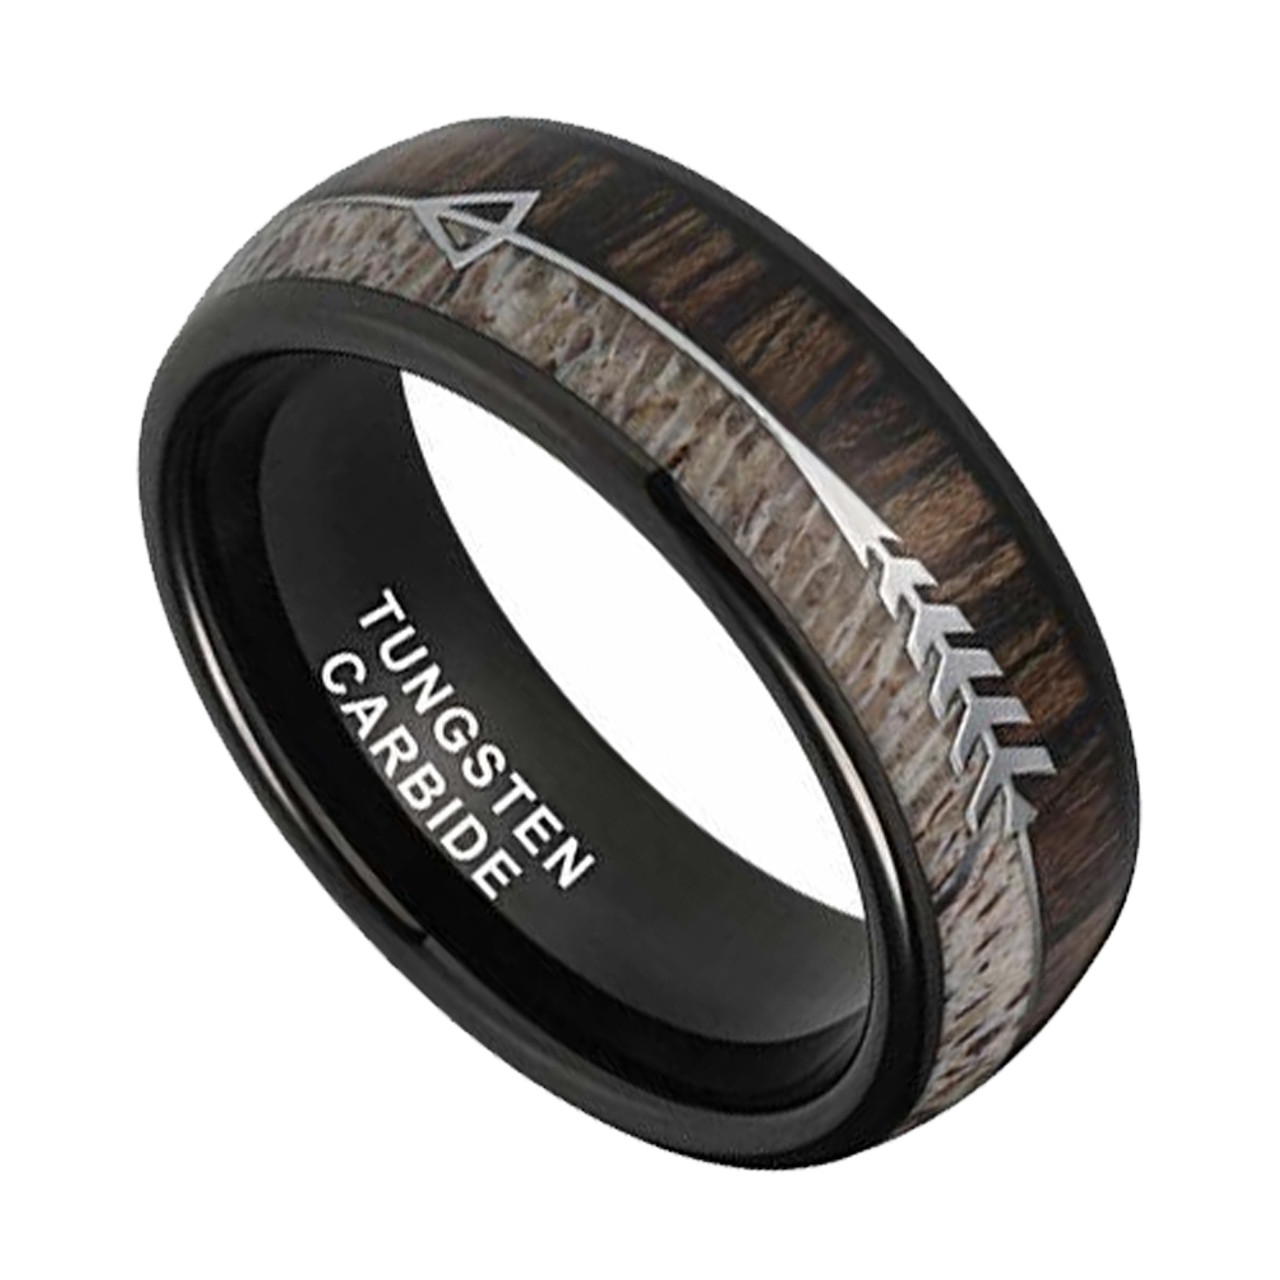 (8mm)  Unisex or Men's Tungsten Carbide Wedding ring bands. Black Cupid's Arrow over Wood Inlay. Tungsten Carbide Ring with High Polish Antler and Dark Wood Inlay. Domed Top Ring.